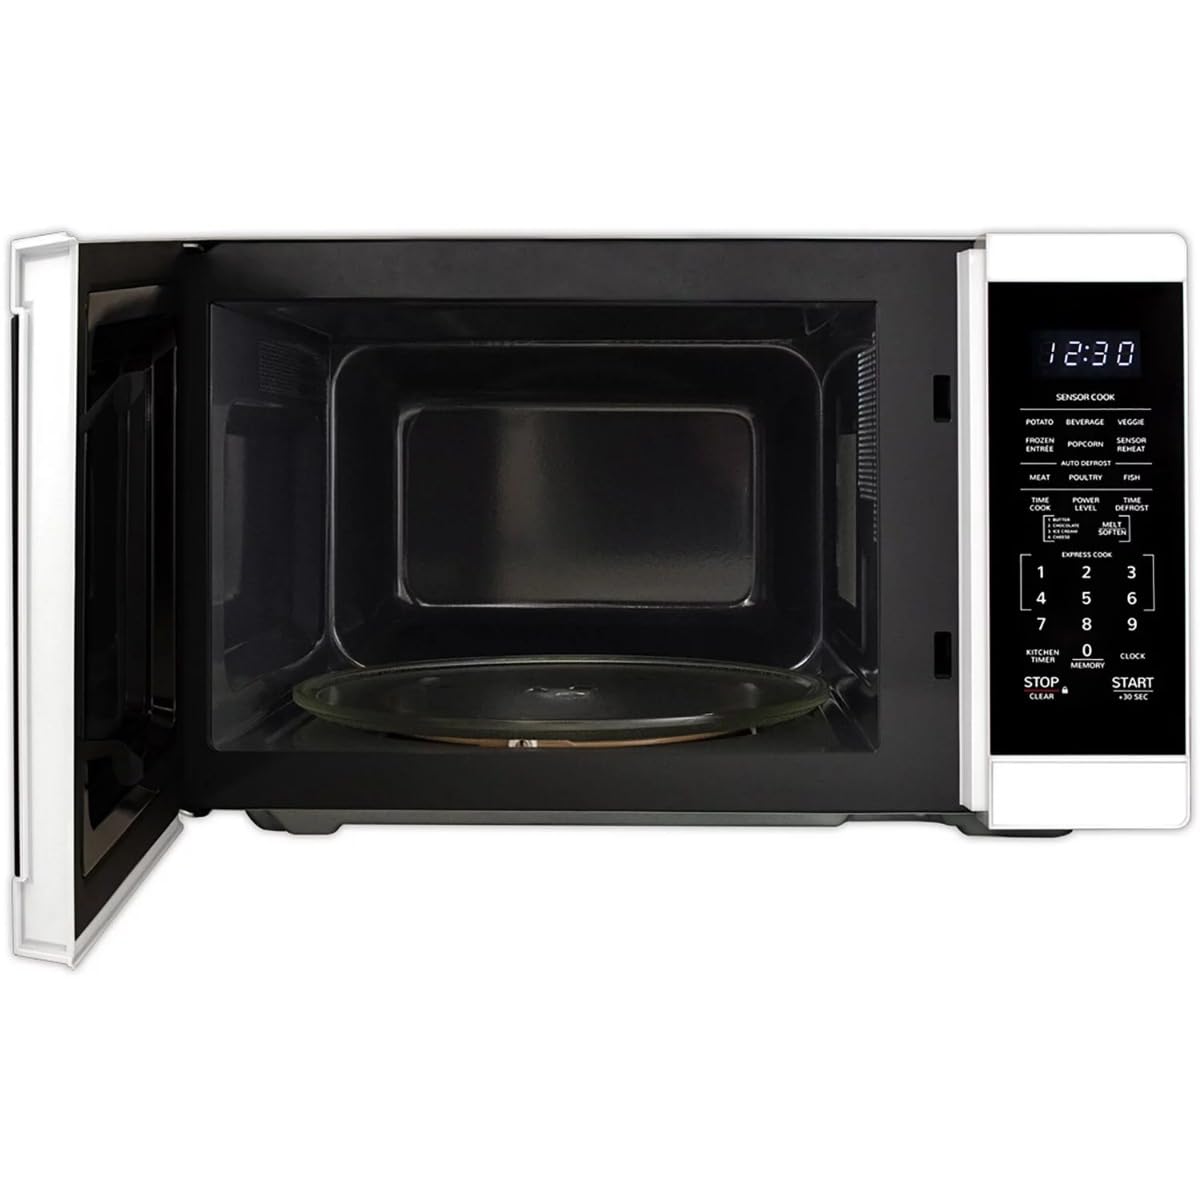 1.4-Cu. Ft. Countertop Microwave Oven in White